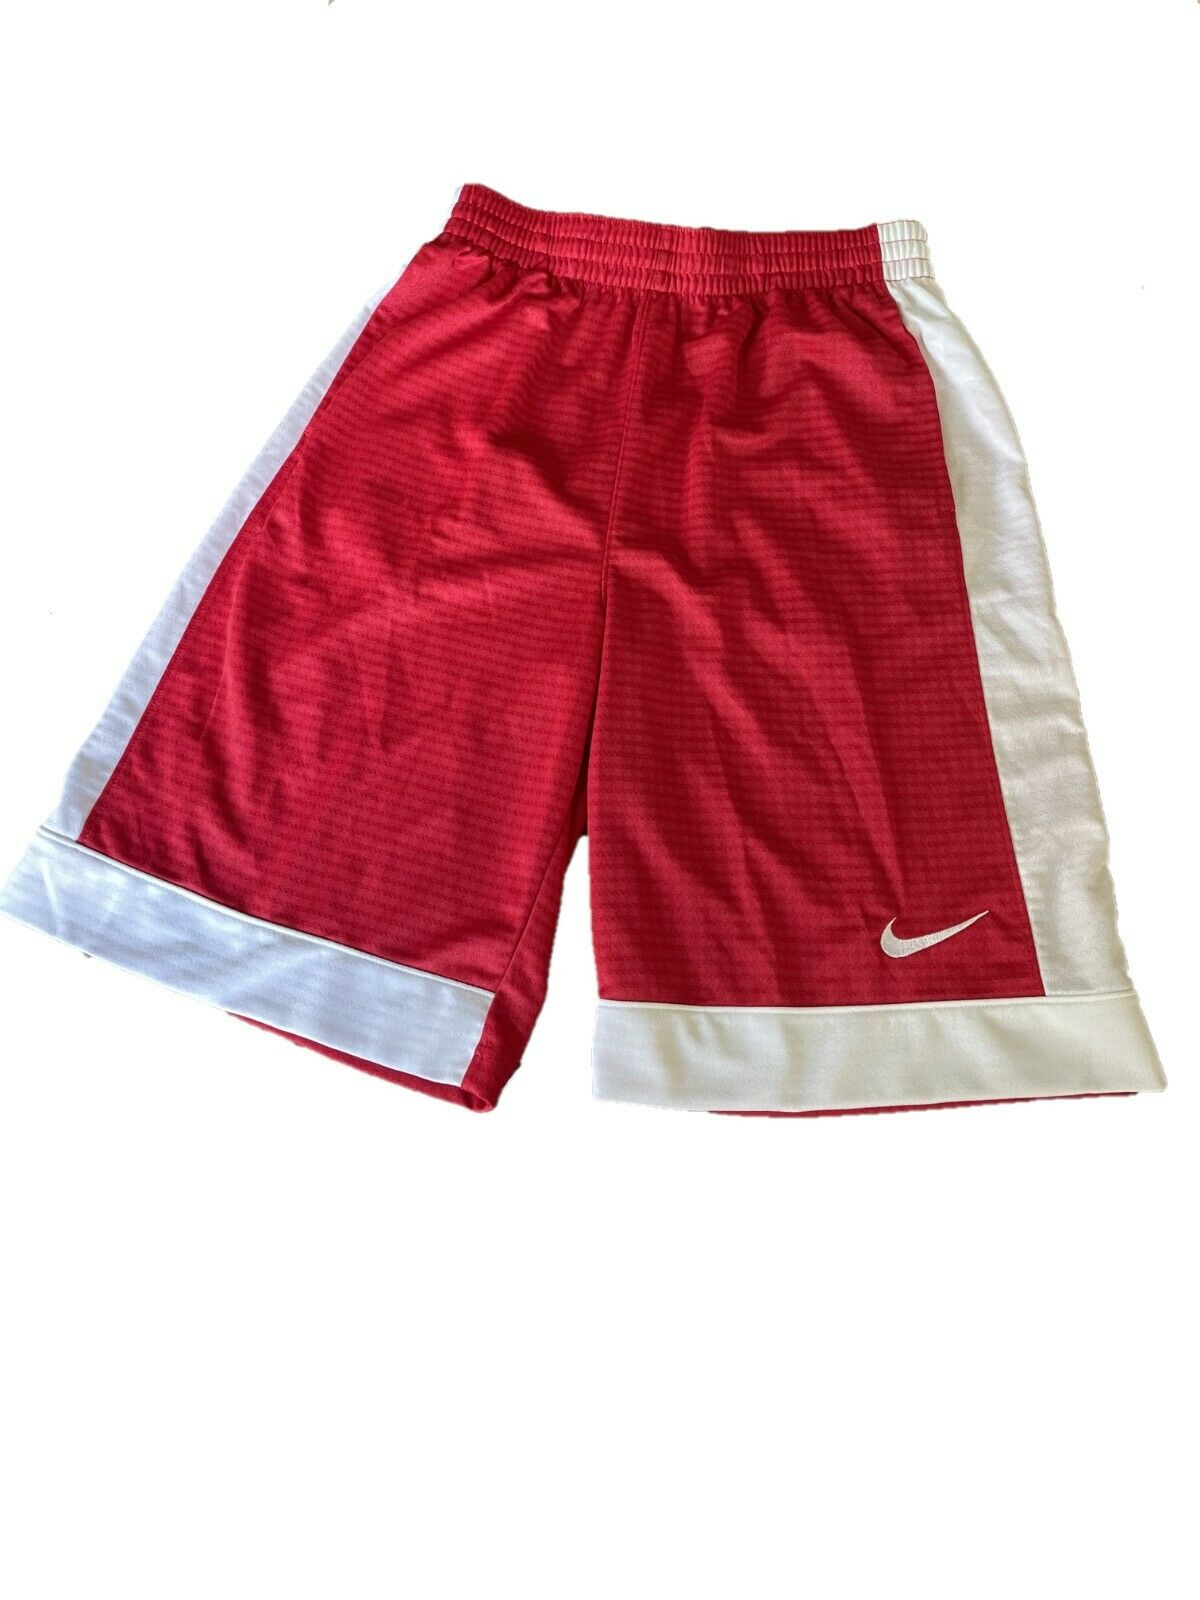 Nike Boys' Assist Shorts Red/white Xl